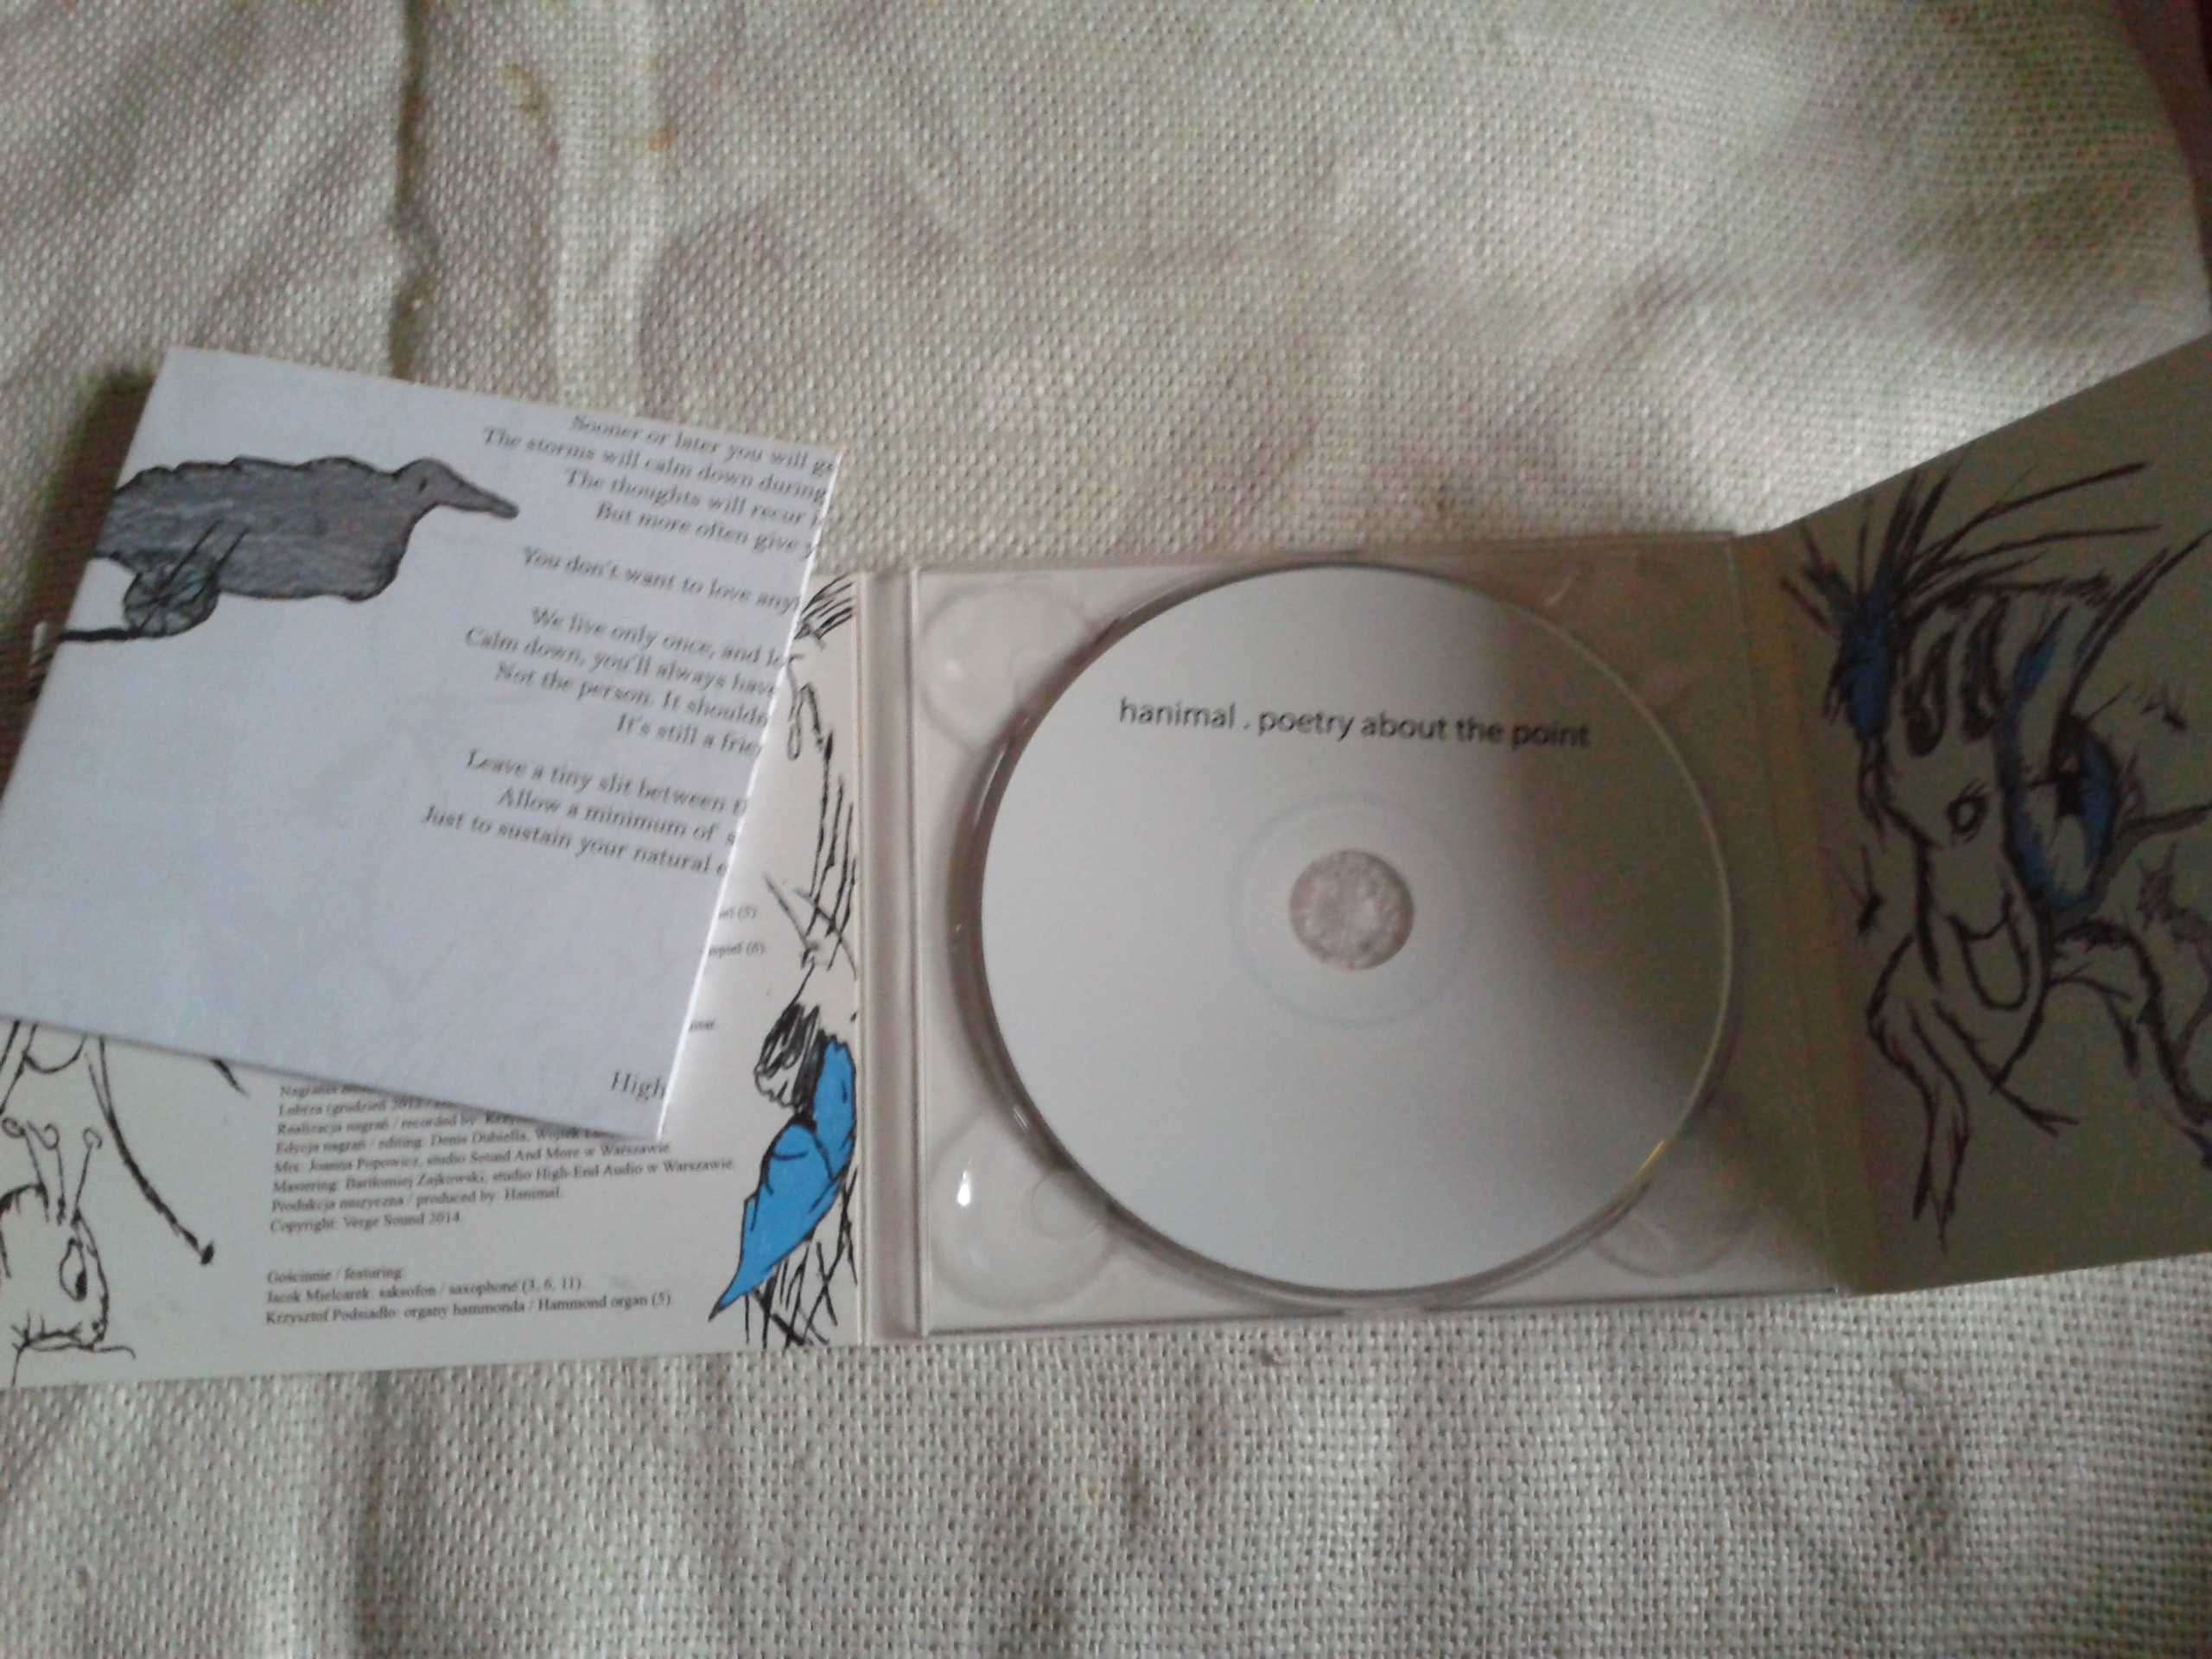 Hanimal – Poetry About The Point  CD